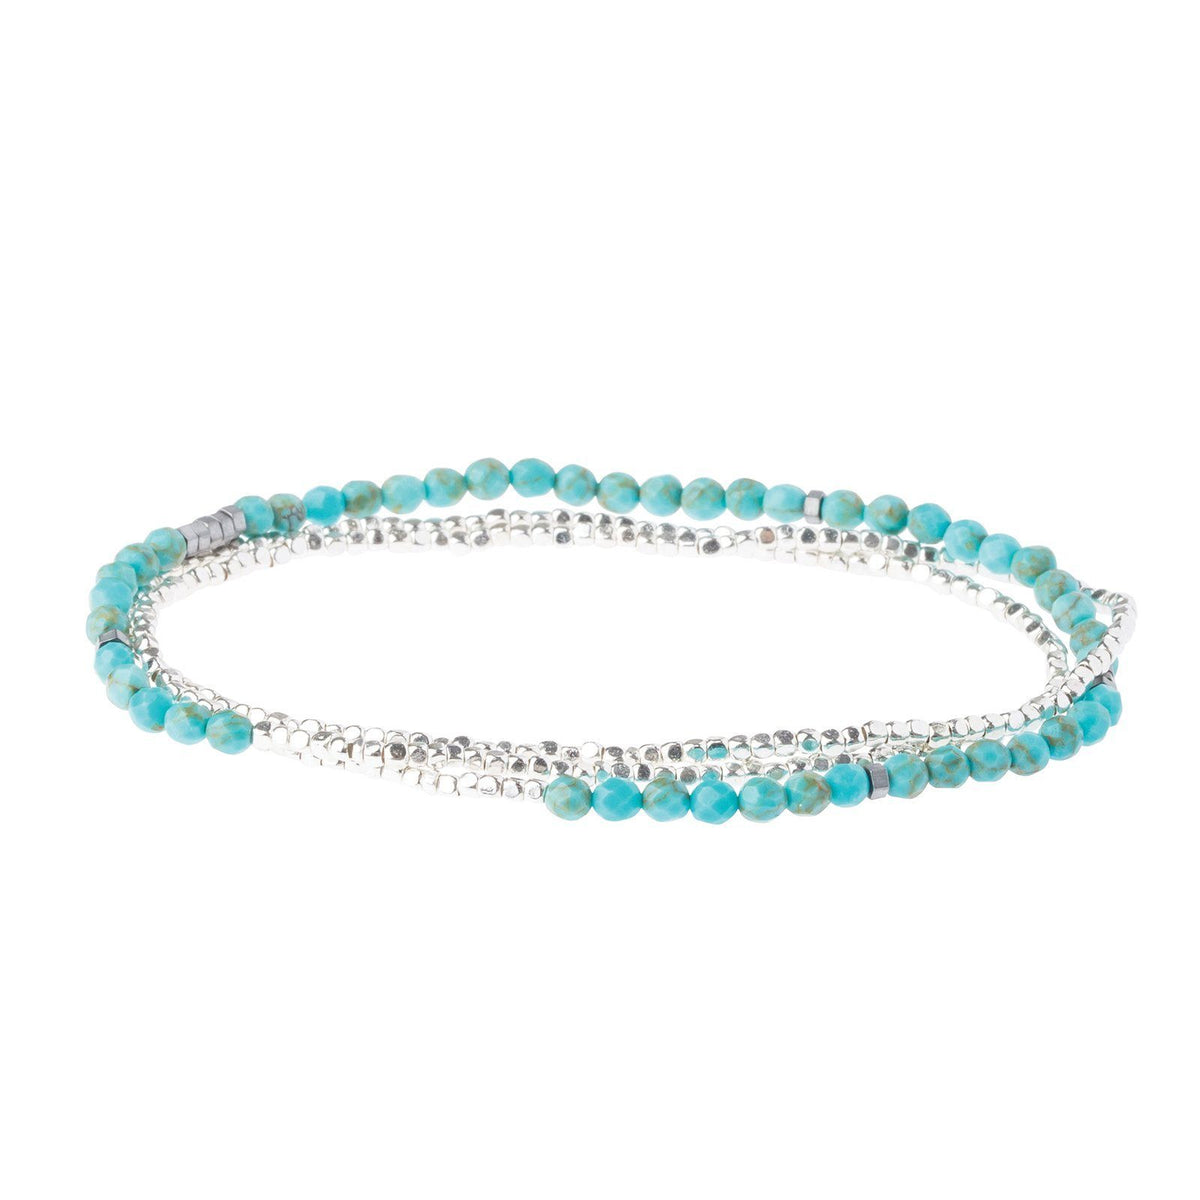 Scout Curated Wears Delicate Stone Turquoise / Silver - Stone of the Sky (1733247926315)